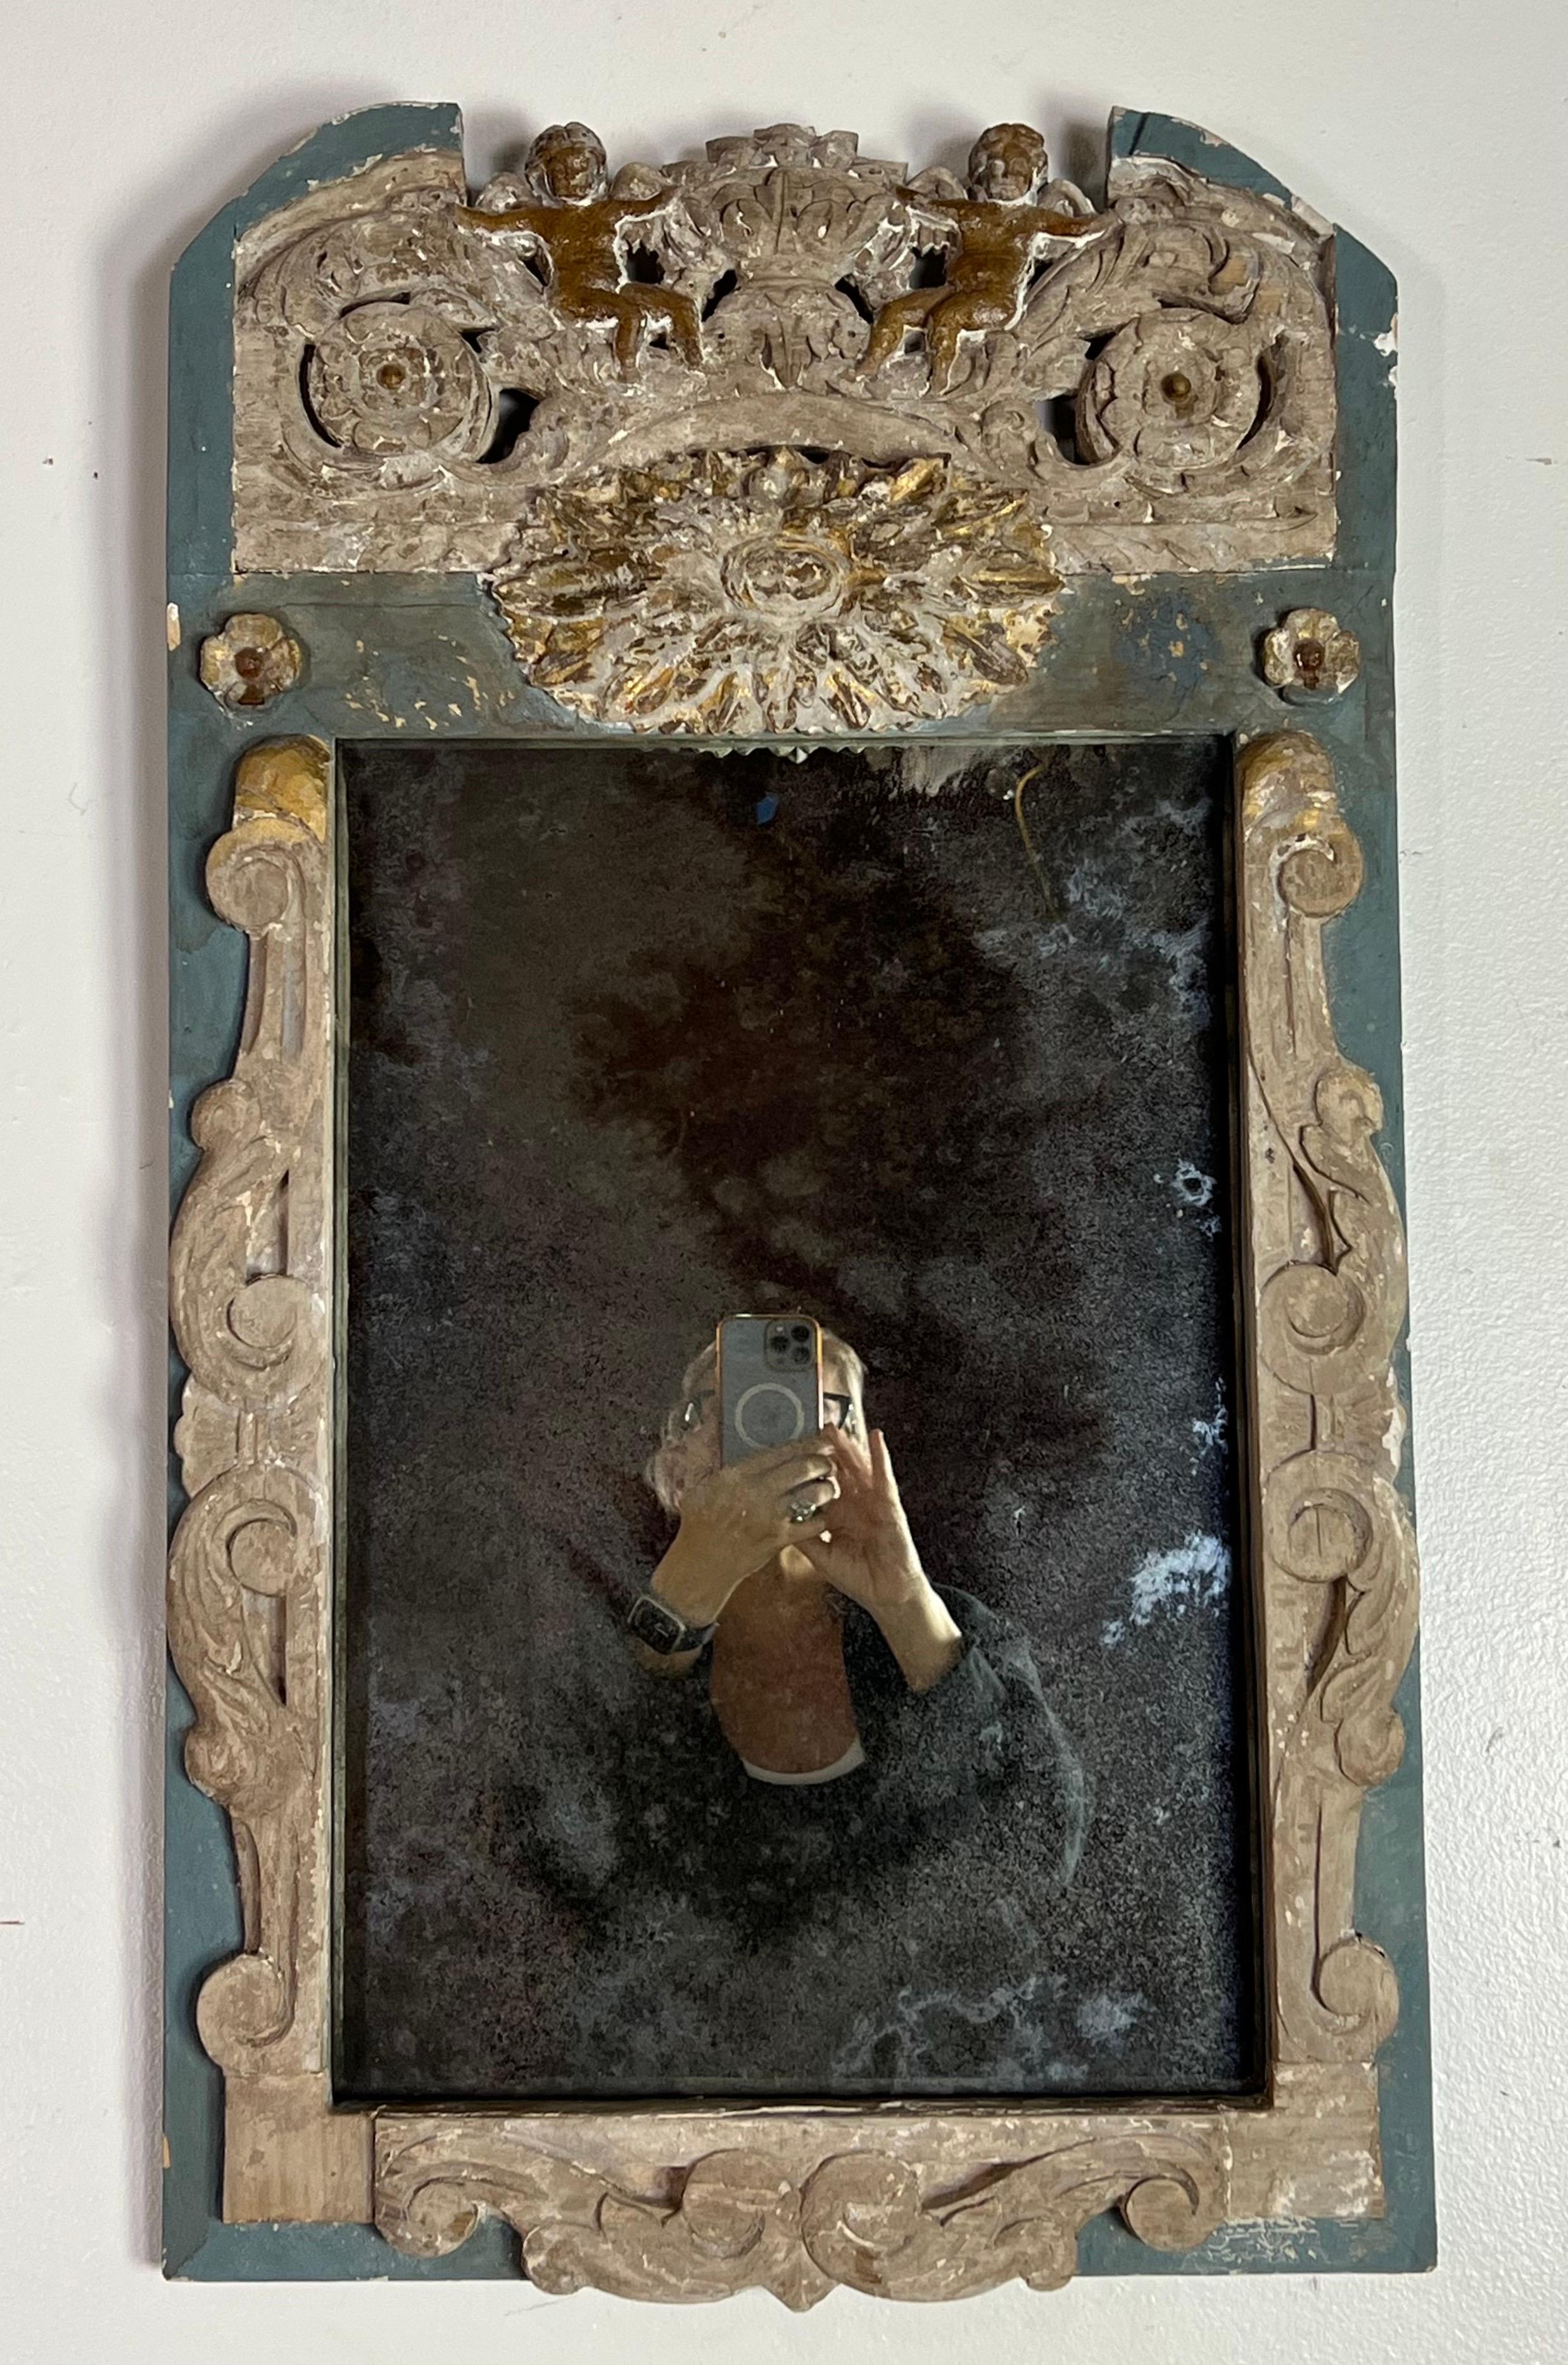 A charming small Italian mirror that speaks to the heart of Italian artistry and romantic design.  The mirror's frame is an exhibition of exquisite carvings, with scrolled acanthus leaves gracefully unfurling across its surface, embodying the